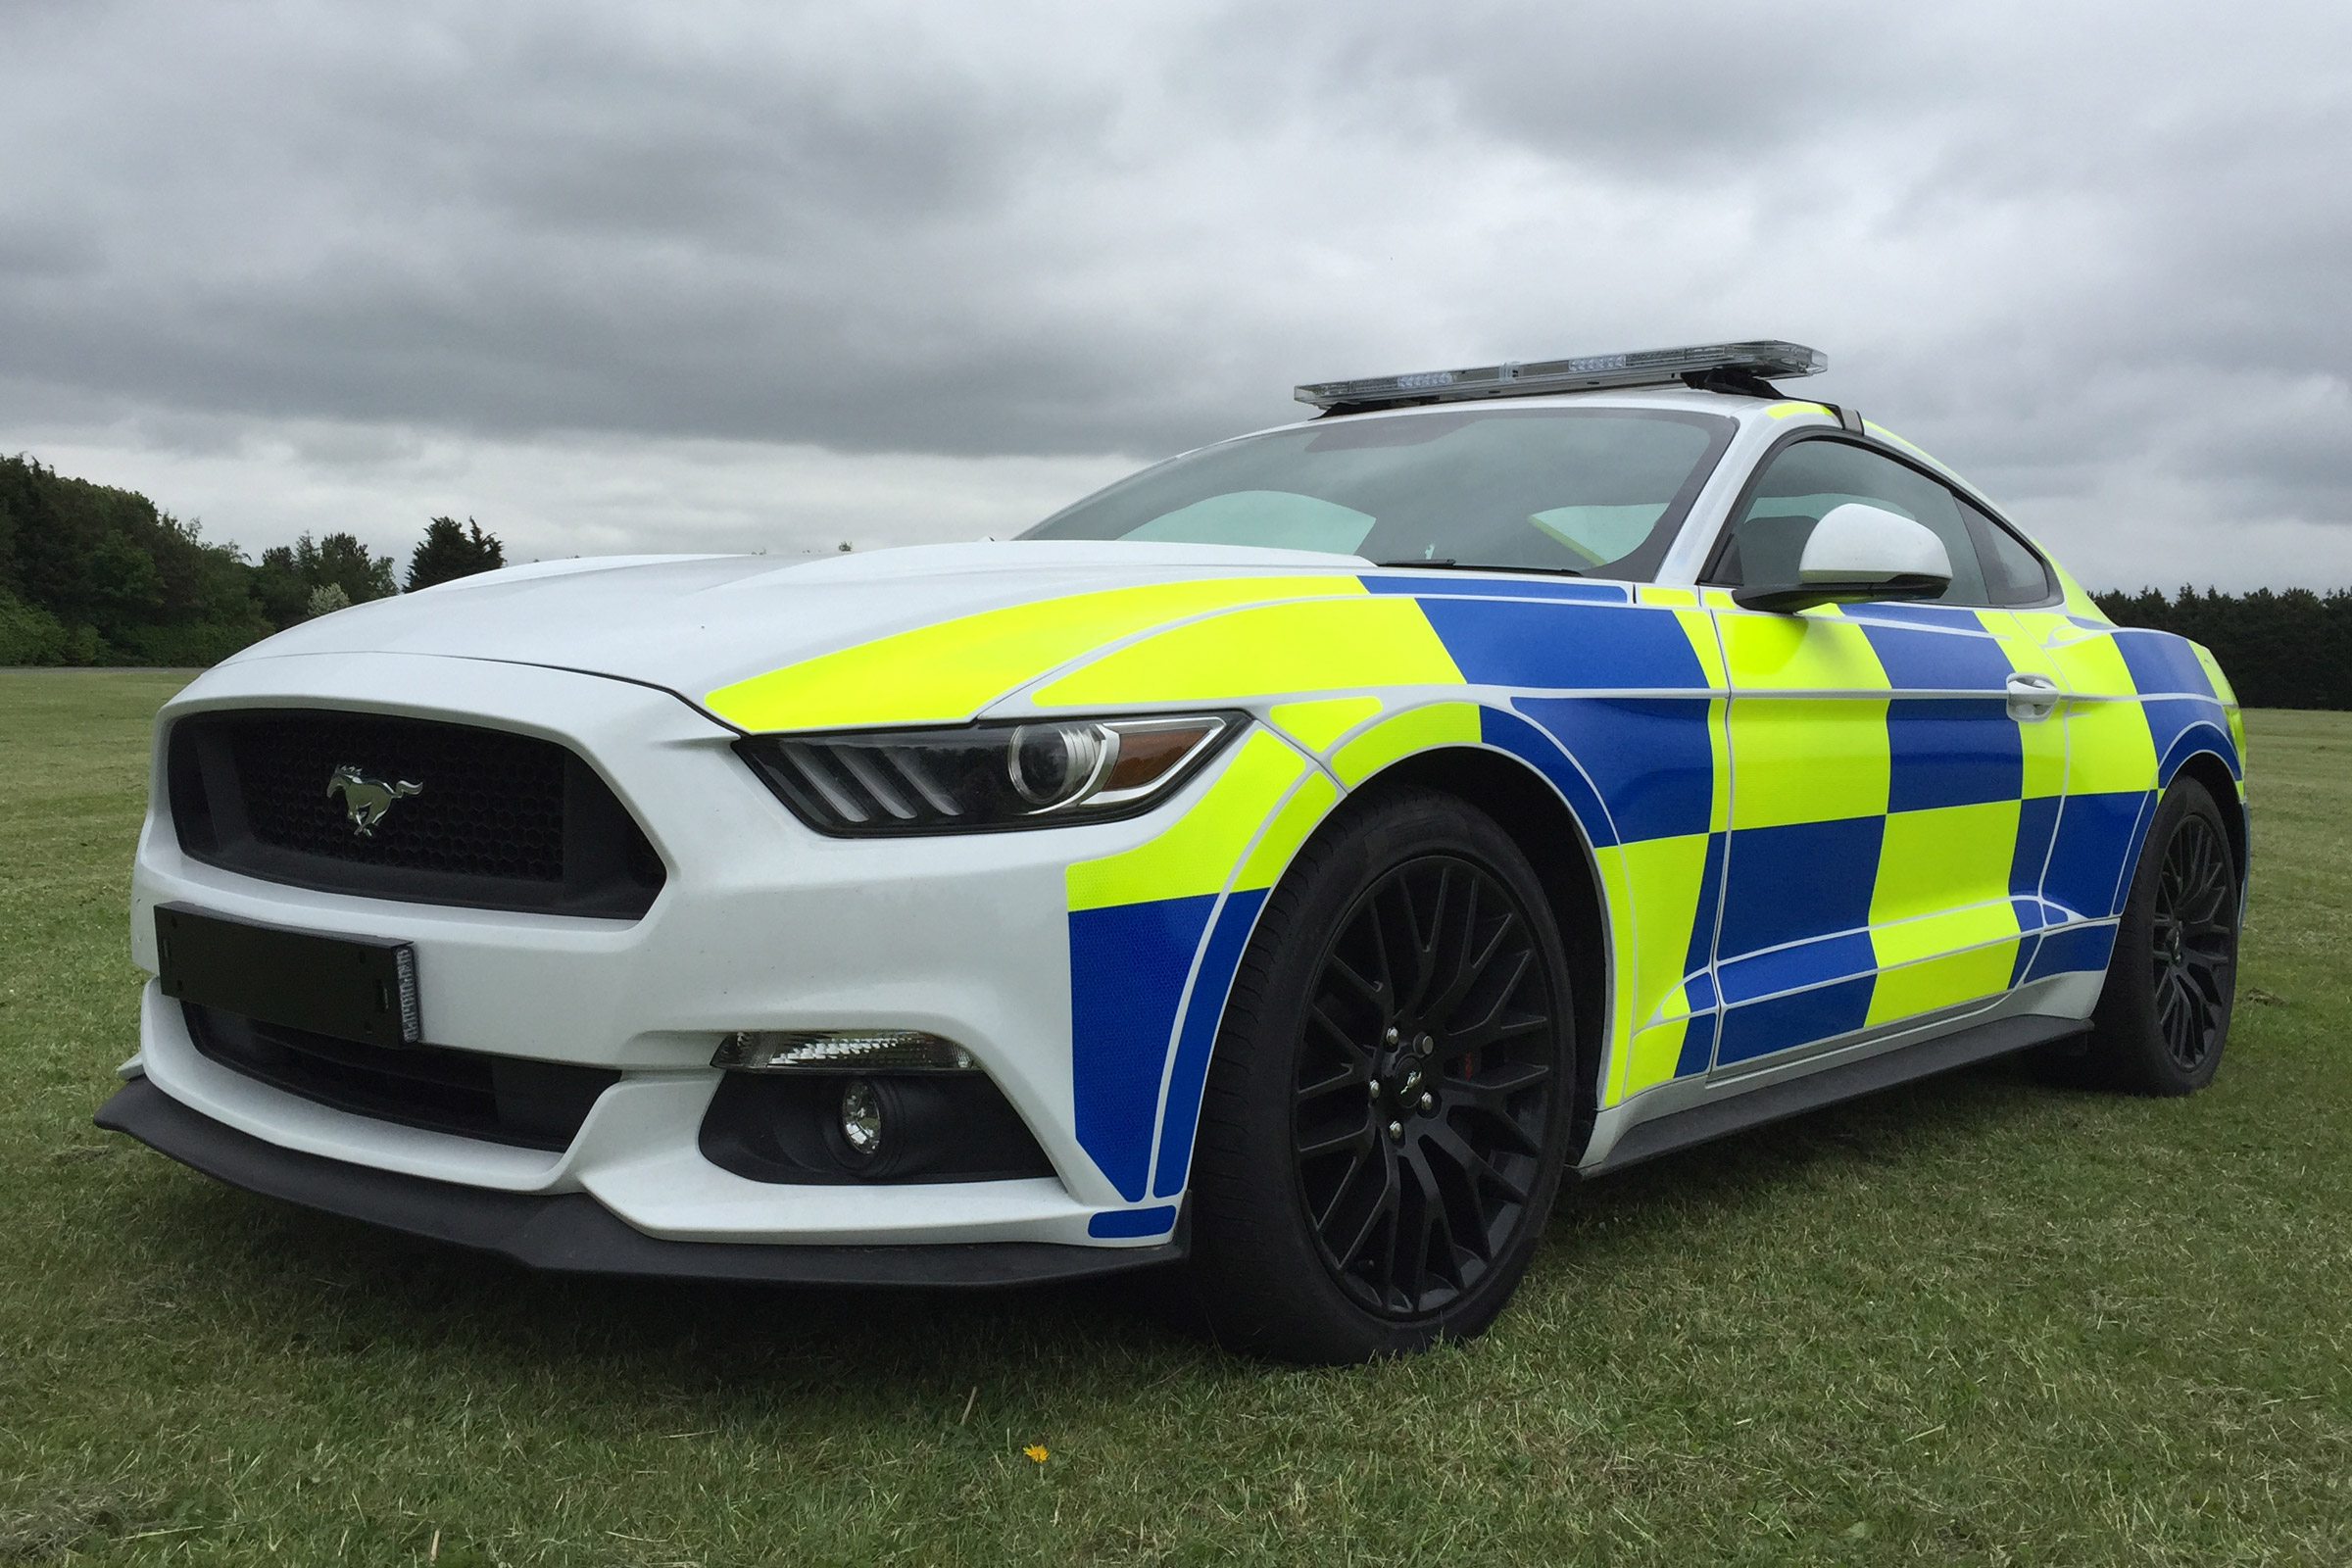 Police Ford Mustangs could join the fleet of UK forces | Auto Express